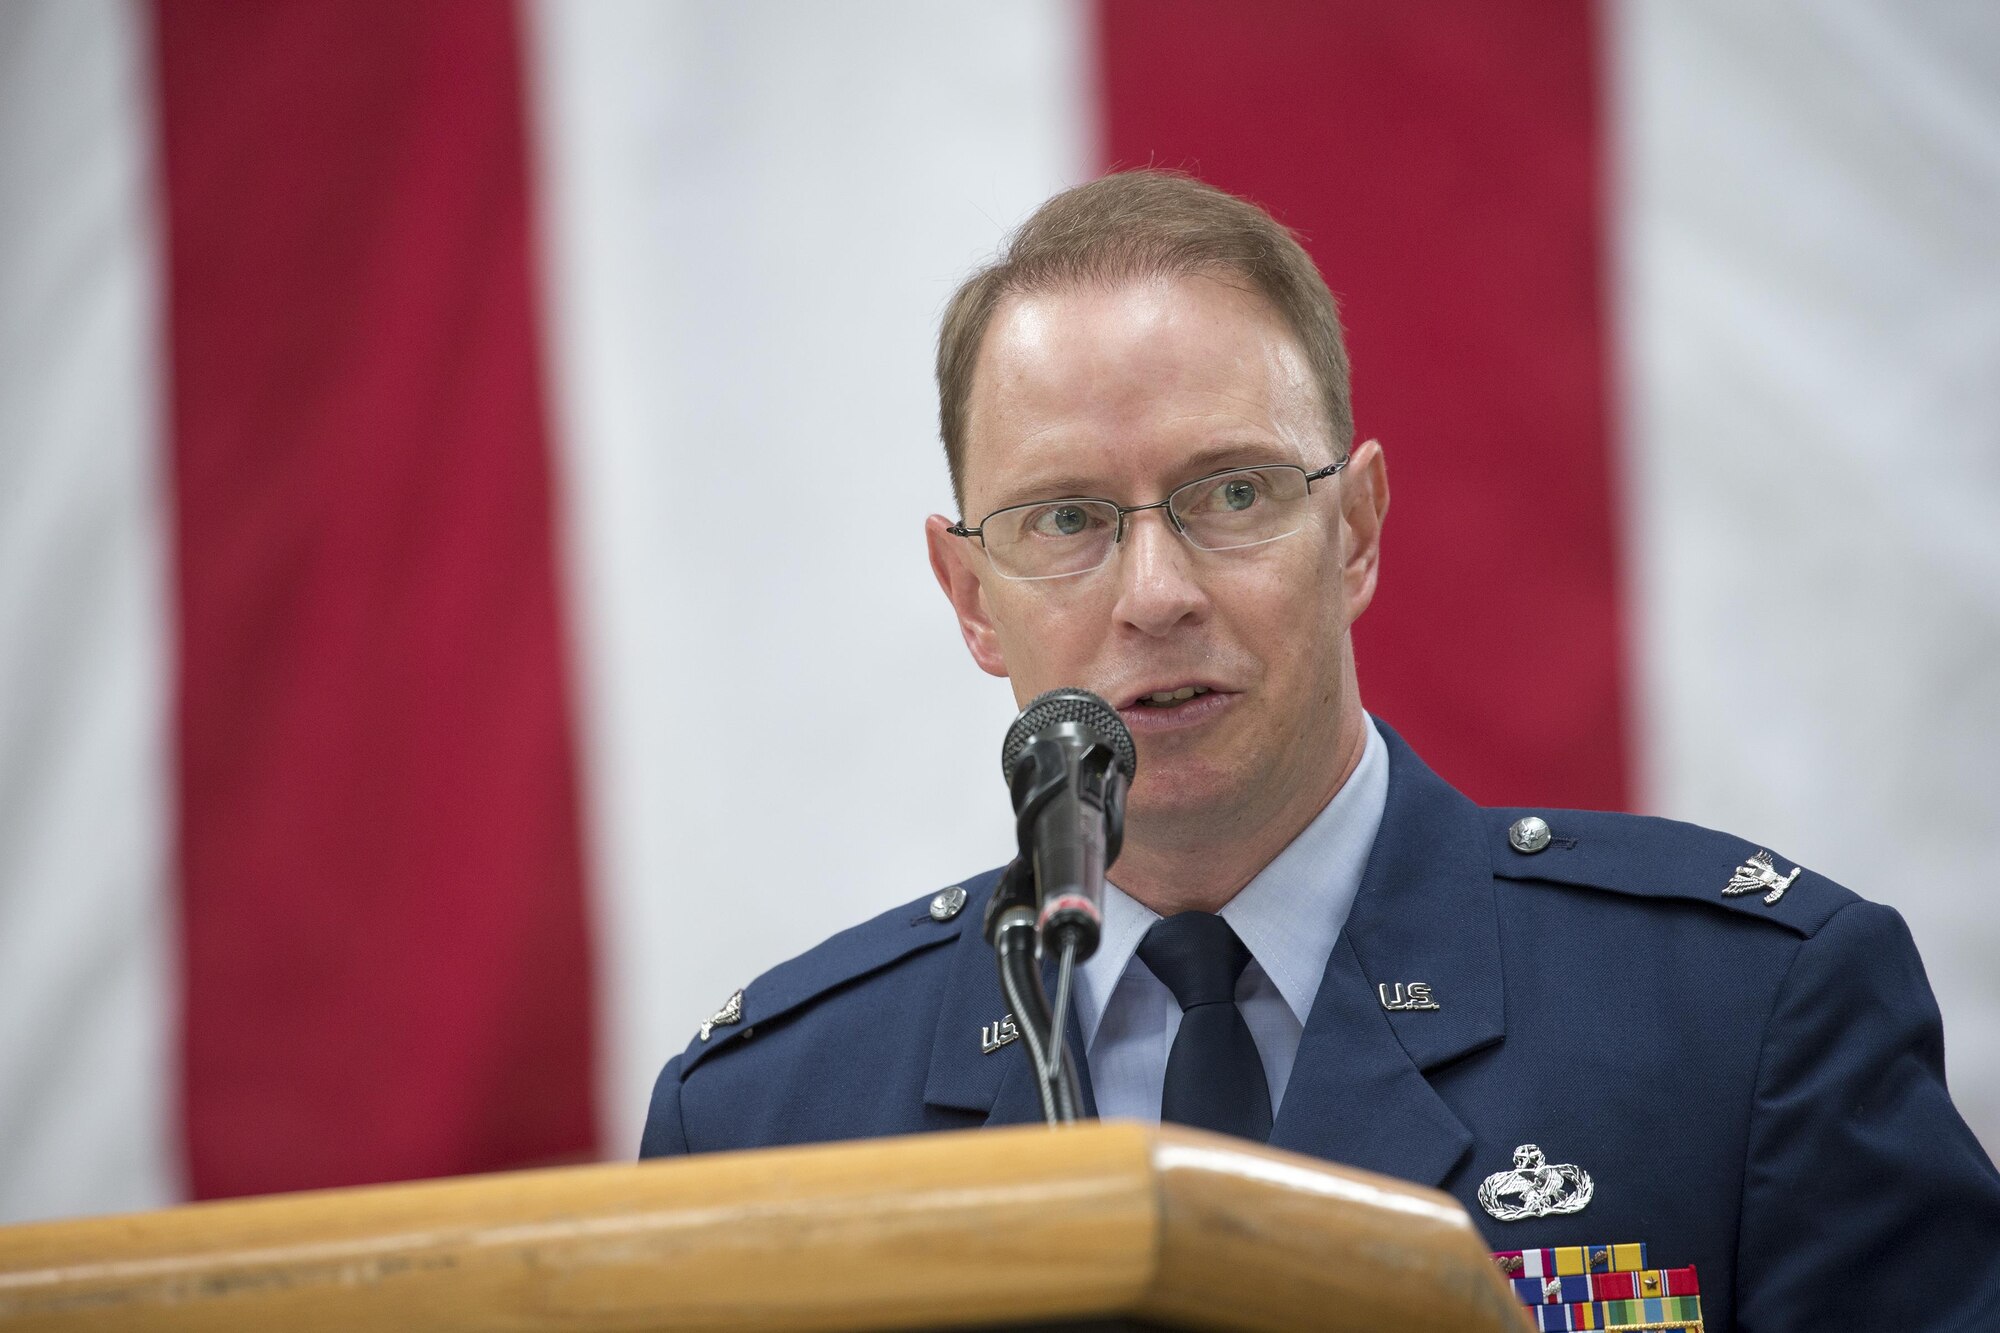 Col. John Winkler, 374th Mission Support Group commander, gives a speech during the 374th MSG change of command ceremony at Yokota Air Base, Japan, Aug. 8. 2016. Prior to taking command, Winkler was the deputy commander for the 319th Mission Support Group, Grand Forks Air Force Base, North Dakota. The change of command ceremony is a symbolic gesture to officially transfer the responsibility between the outgoing and incoming commander. (U.S. Air Force photo by Yasuo Osakabe/Released)